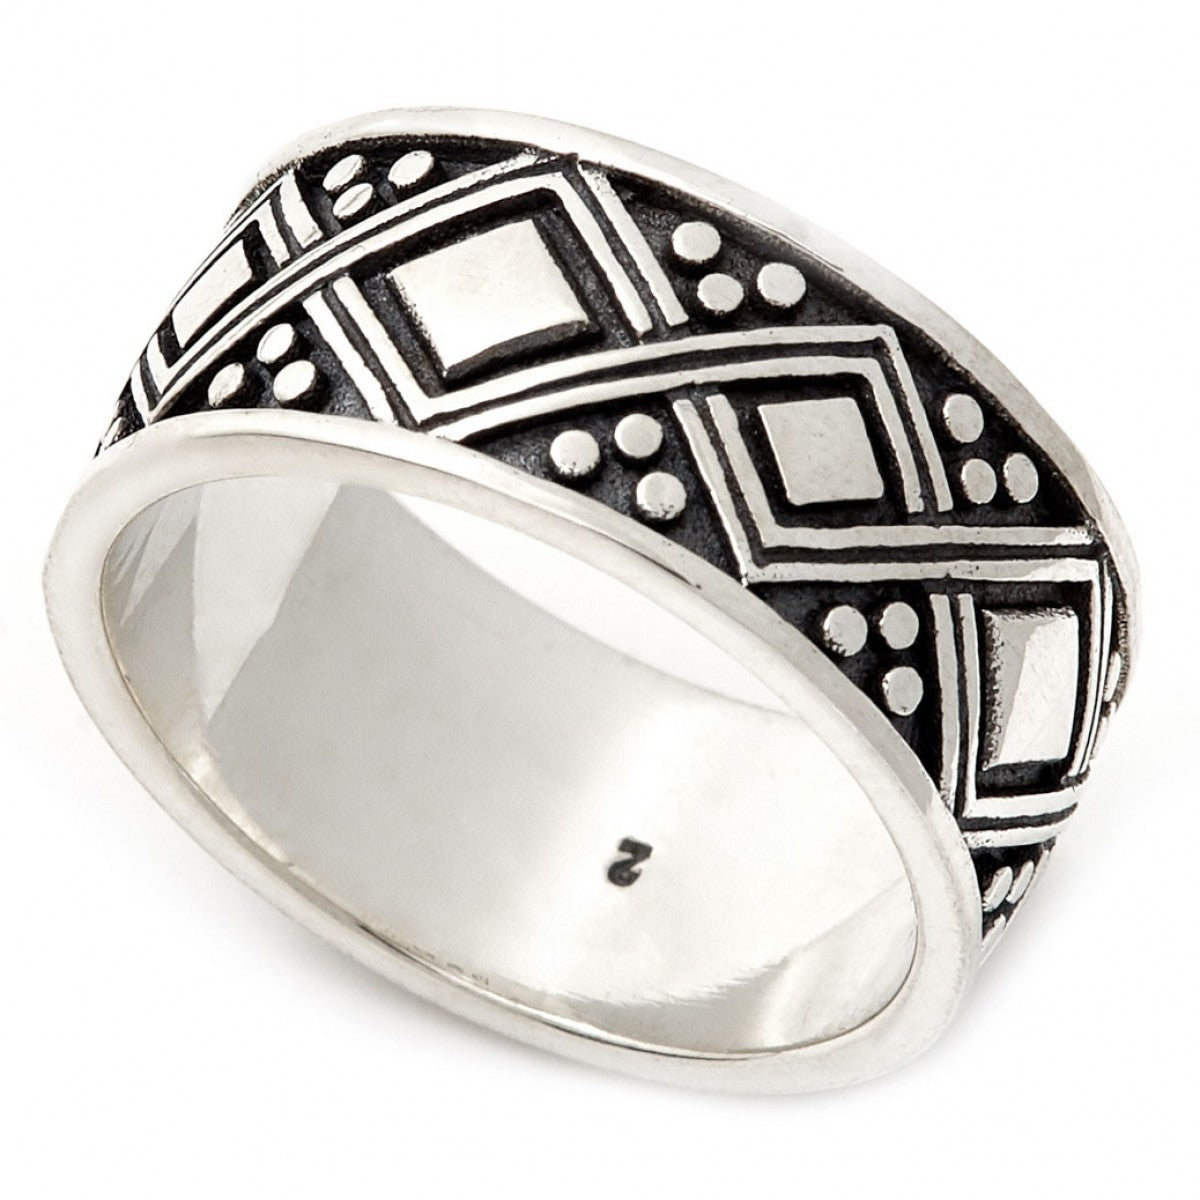 Konstantino Men's Sterling Silver Ring With Engraved Diamond Patterns ...